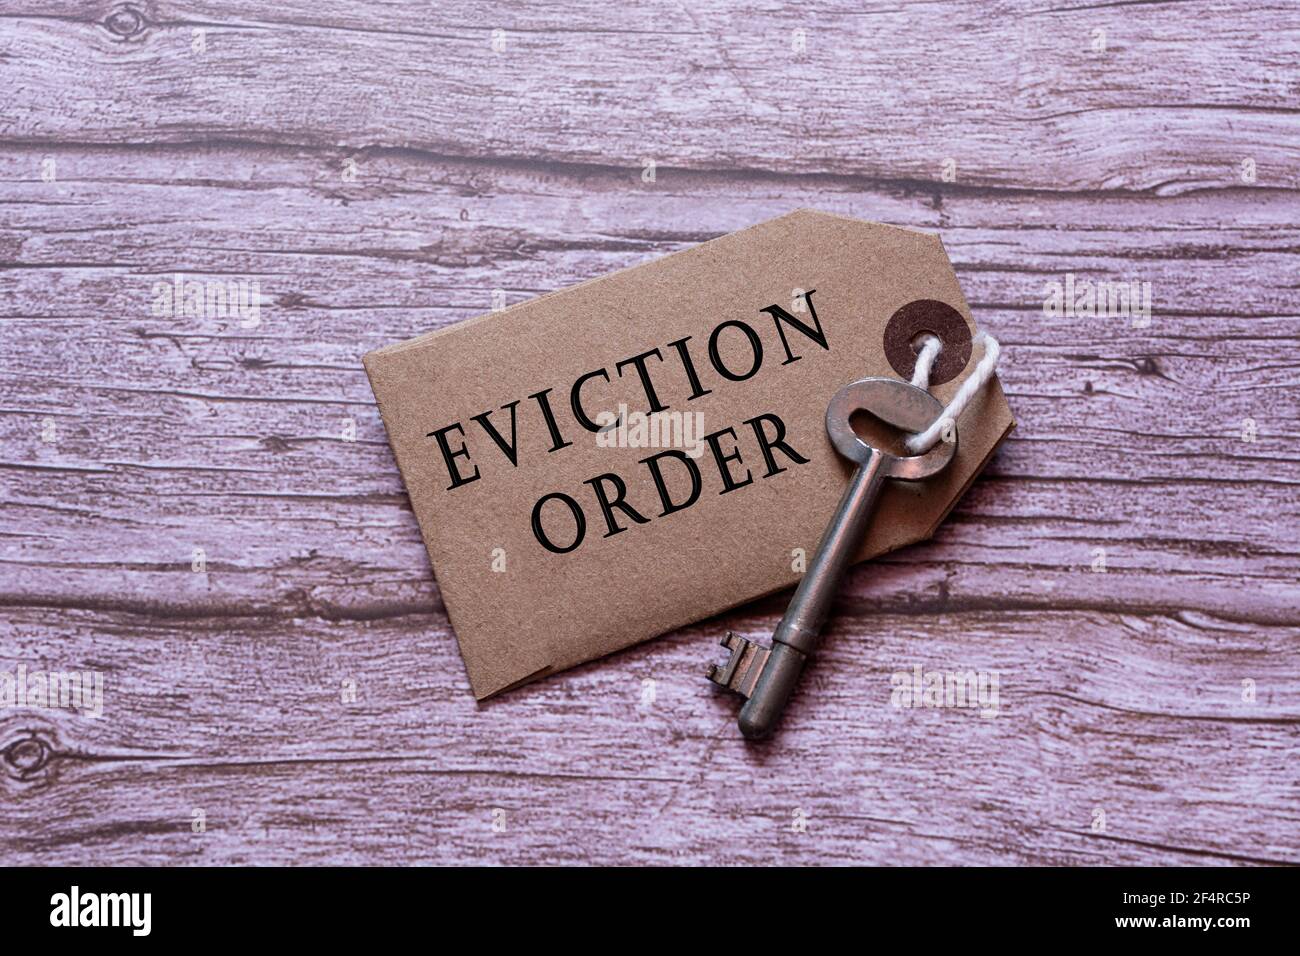 Text on brown tag with key on wooden table - Eviction order Stock Photo